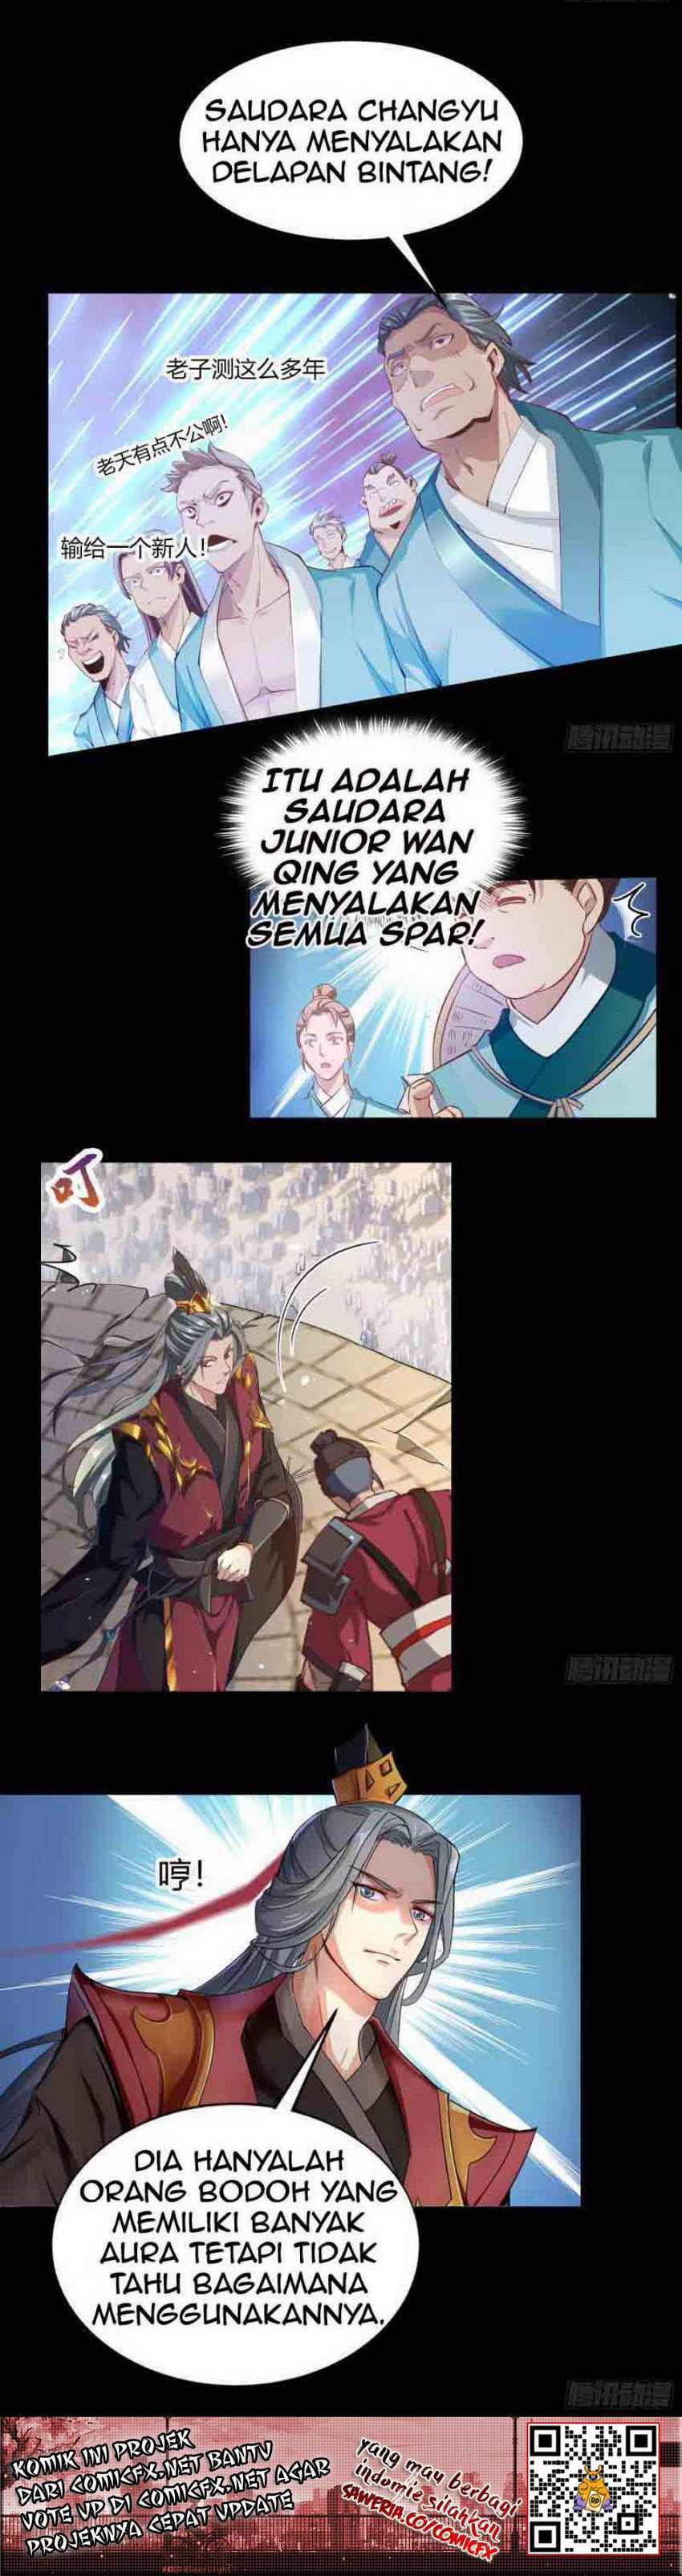 The Legend of Qing Emperor Chapter 38 bahasa indonesia